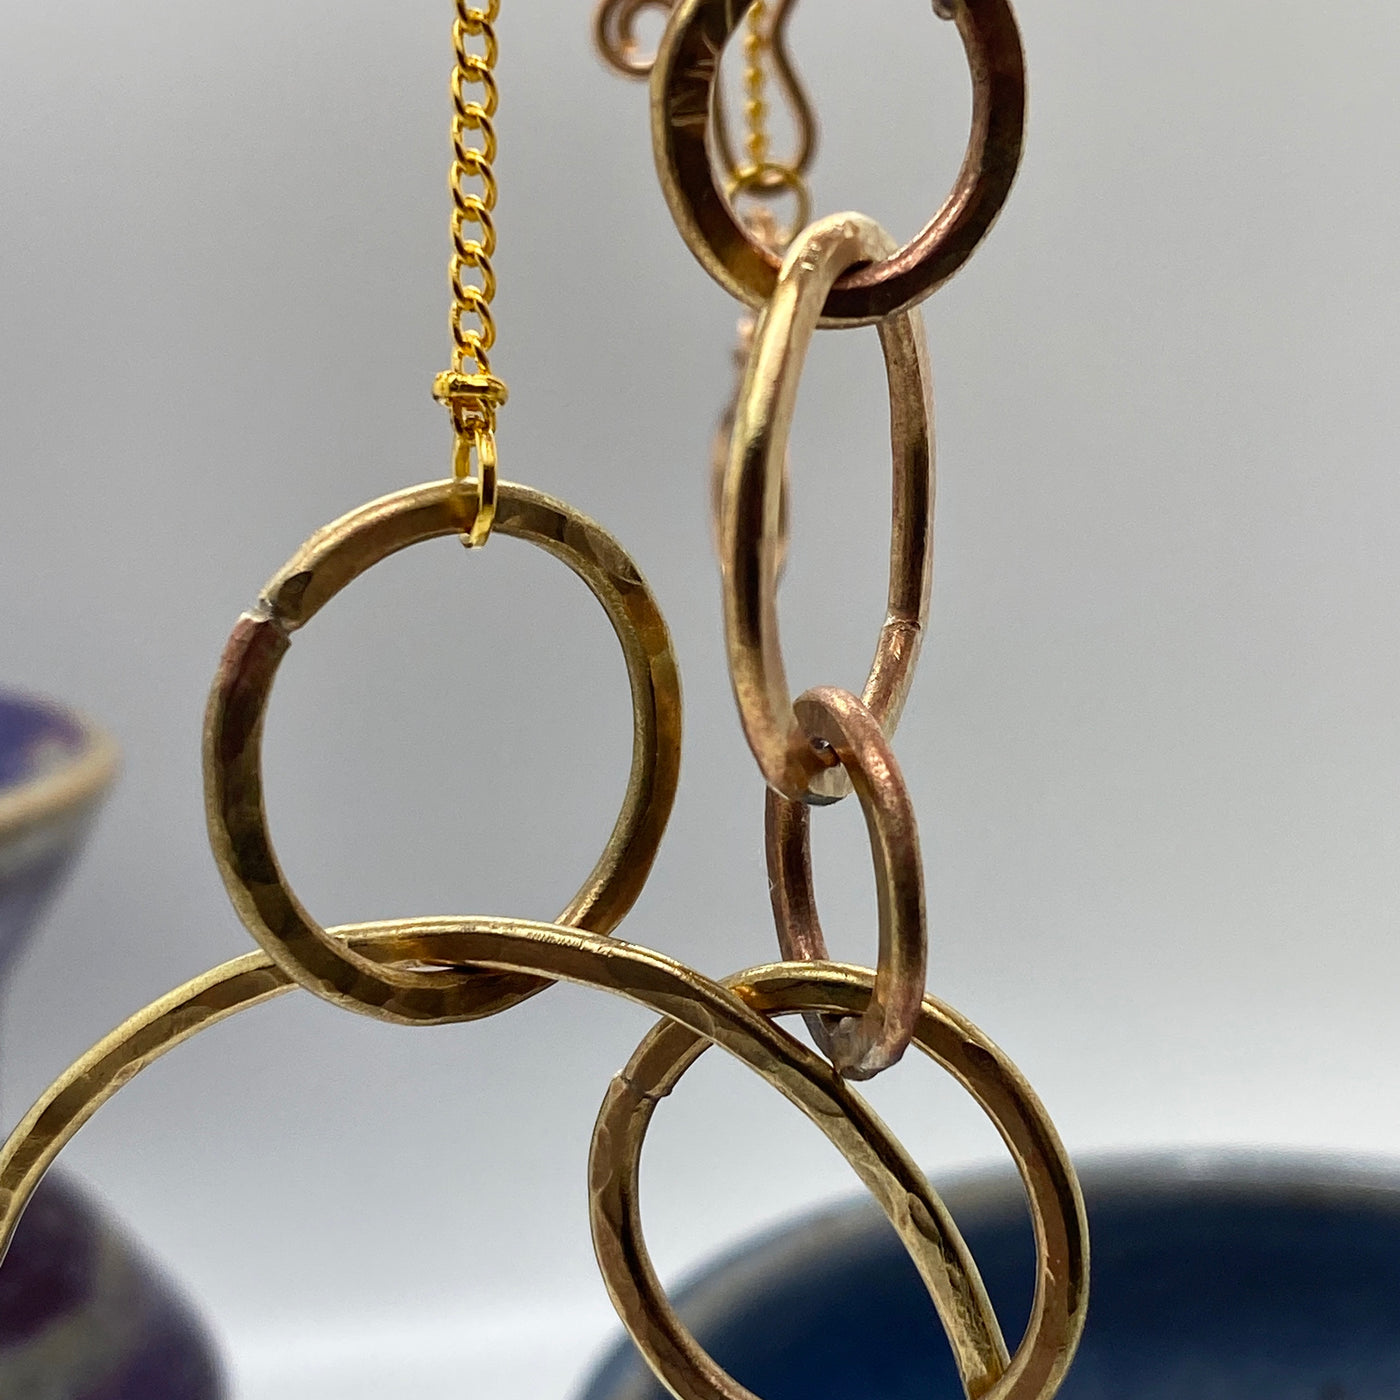 Brass circle texturized necklace on chain with golden glass beads